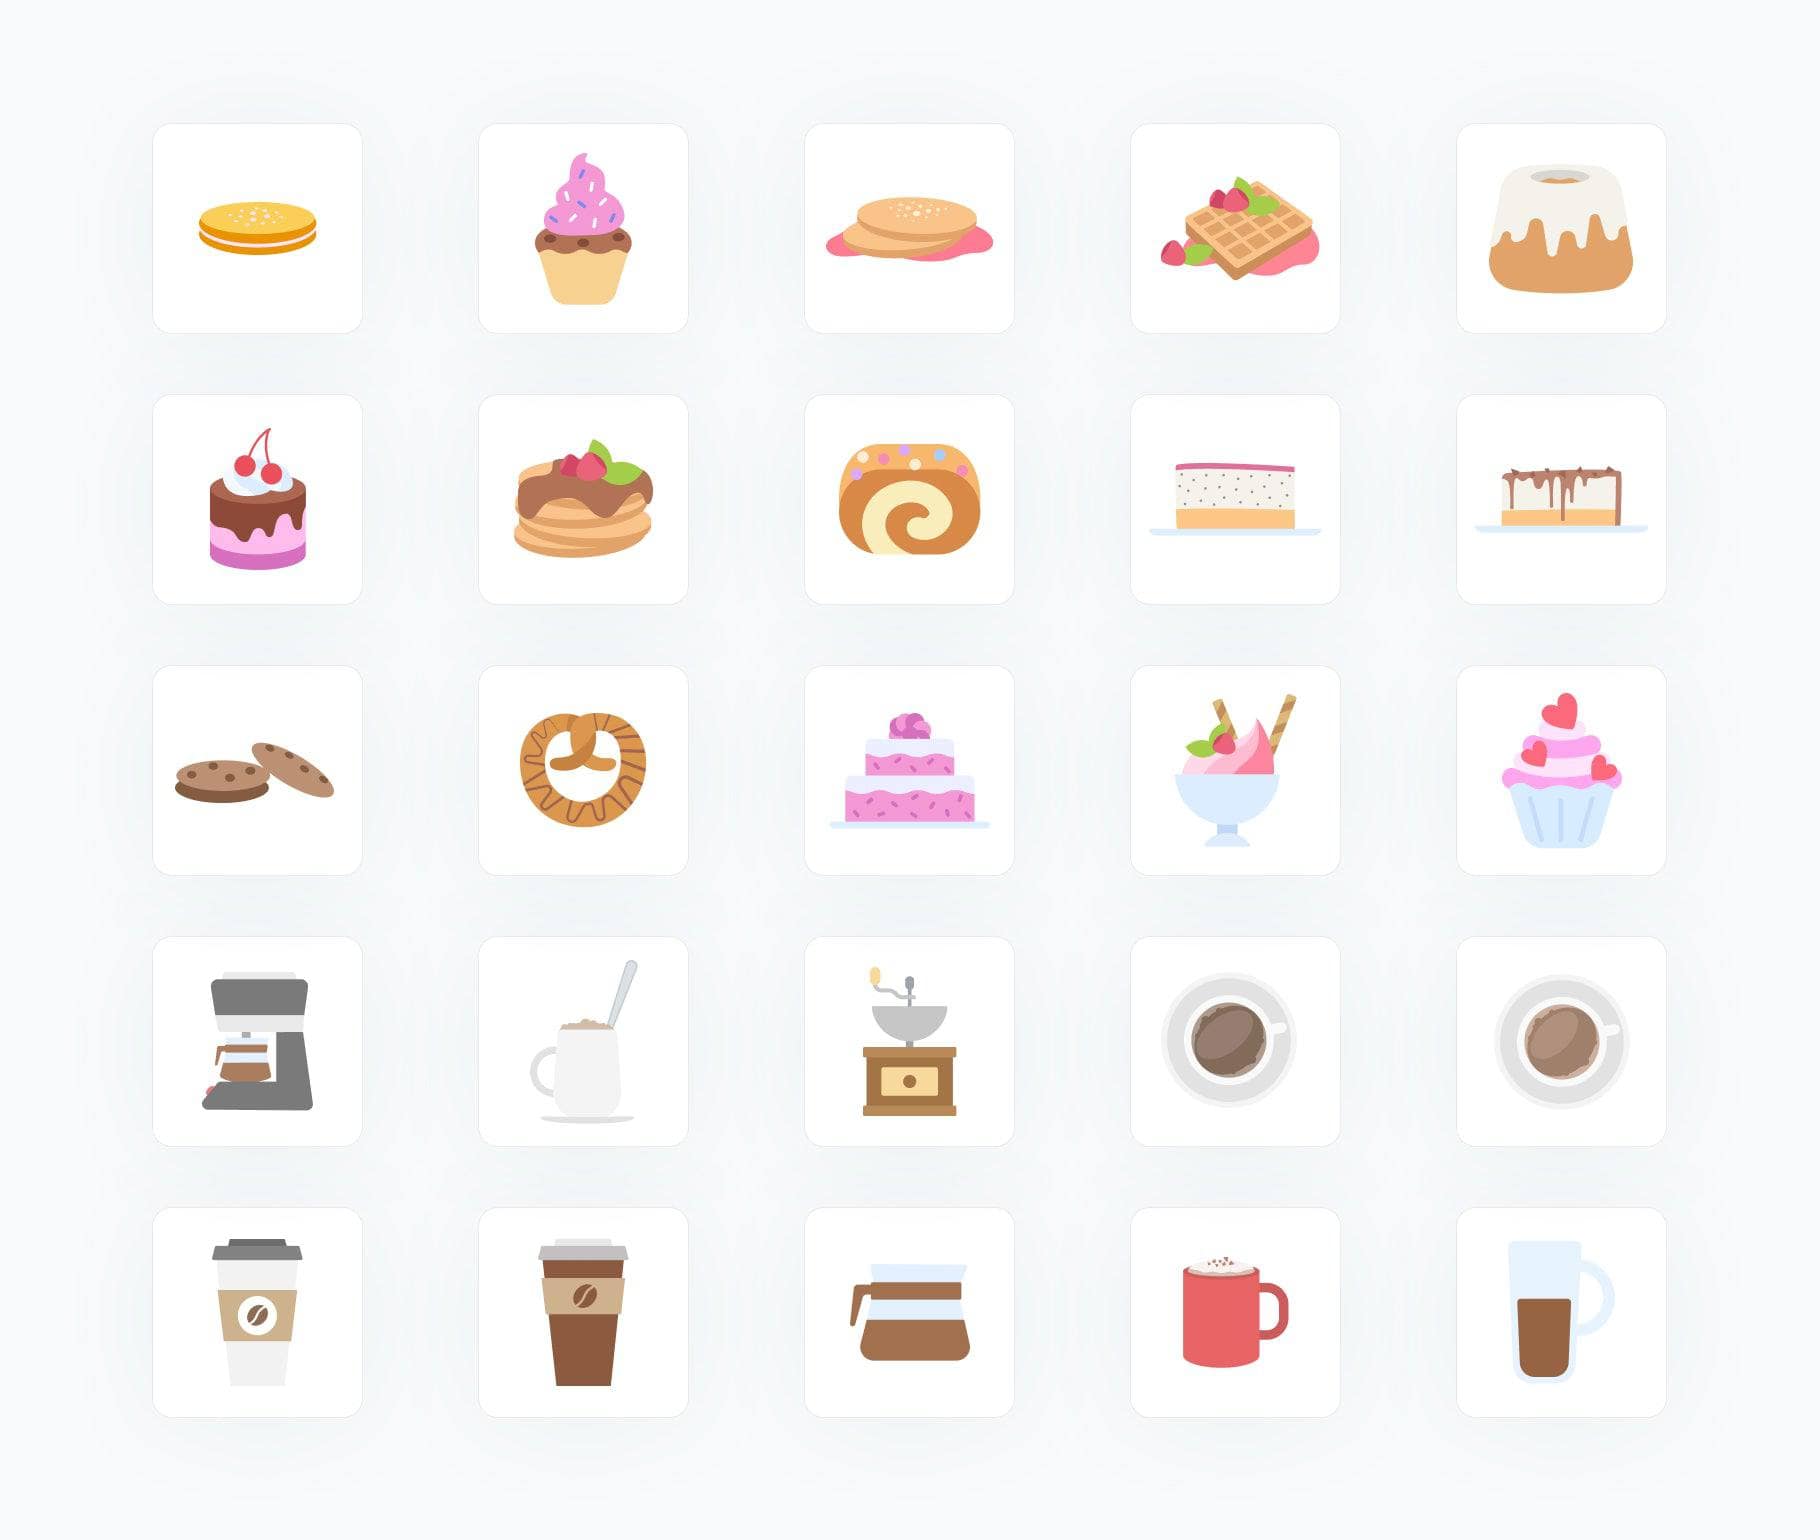 Accounting-Flat-Vector-Icons Icons Coffee Donuts and Cakes Items Flat Vector Icons S02142201 powerpoint-template keynote-template google-slides-template infographic-template